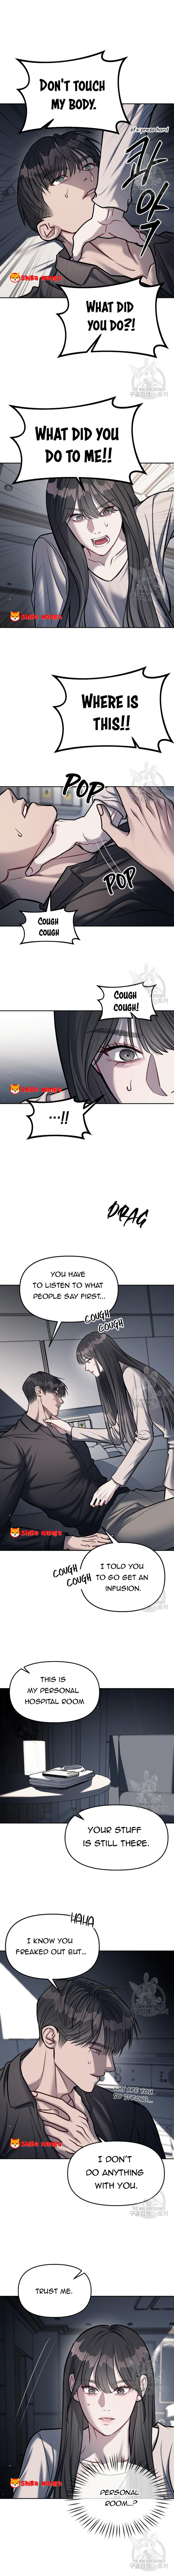 Infiltrate! Chaebol - chapter 17 - #2